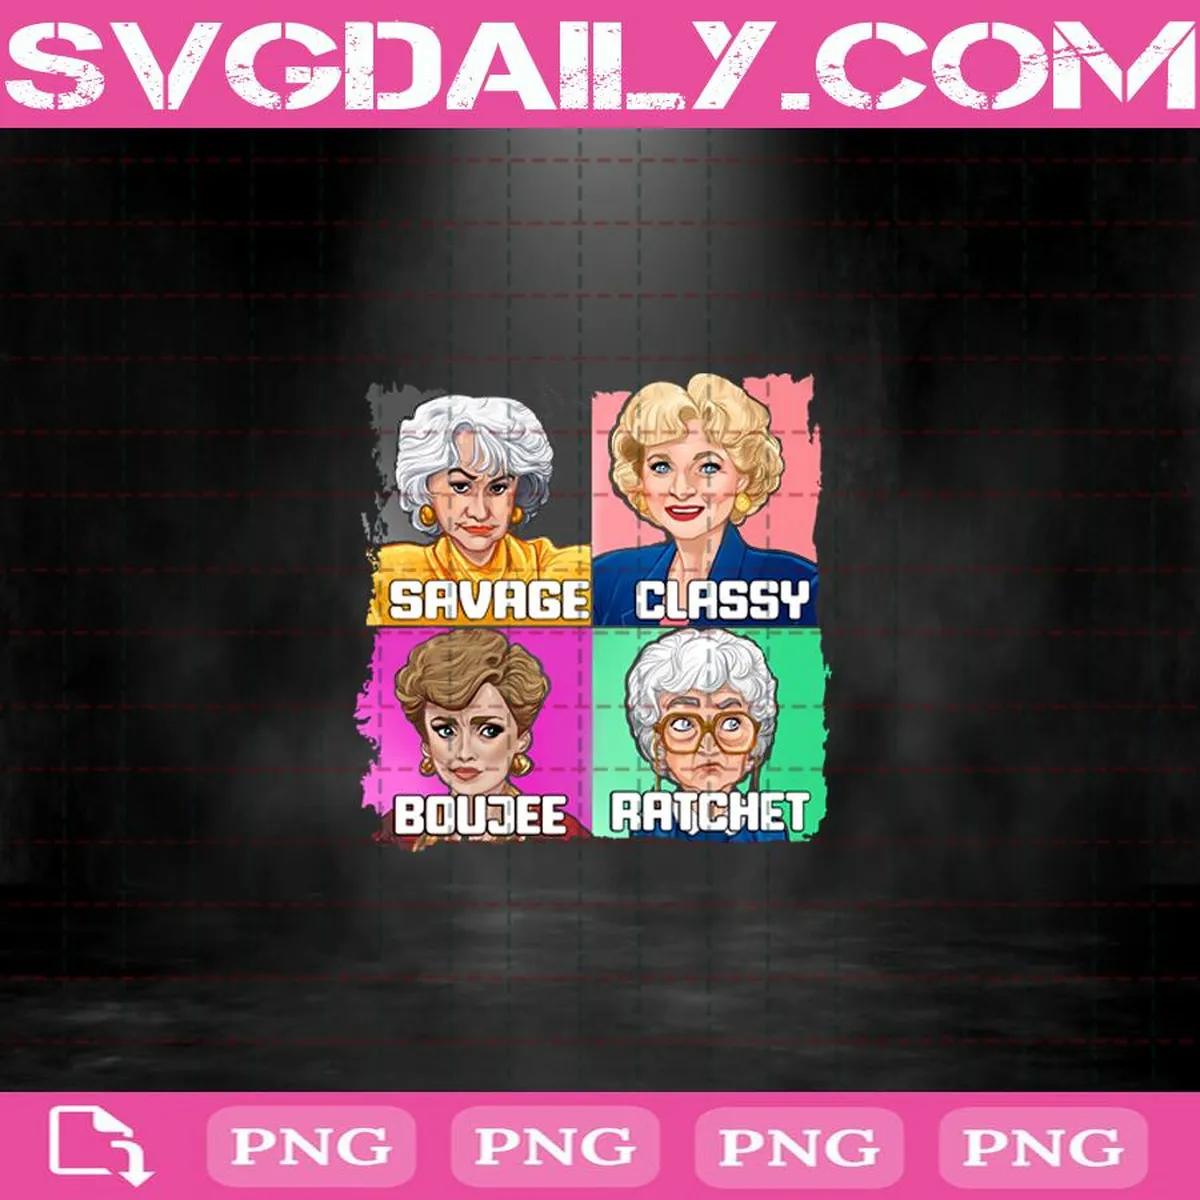 Golden Girls Png, Savage Png, Classy Png, Boujee Png, Ratchet Png, Png File Download